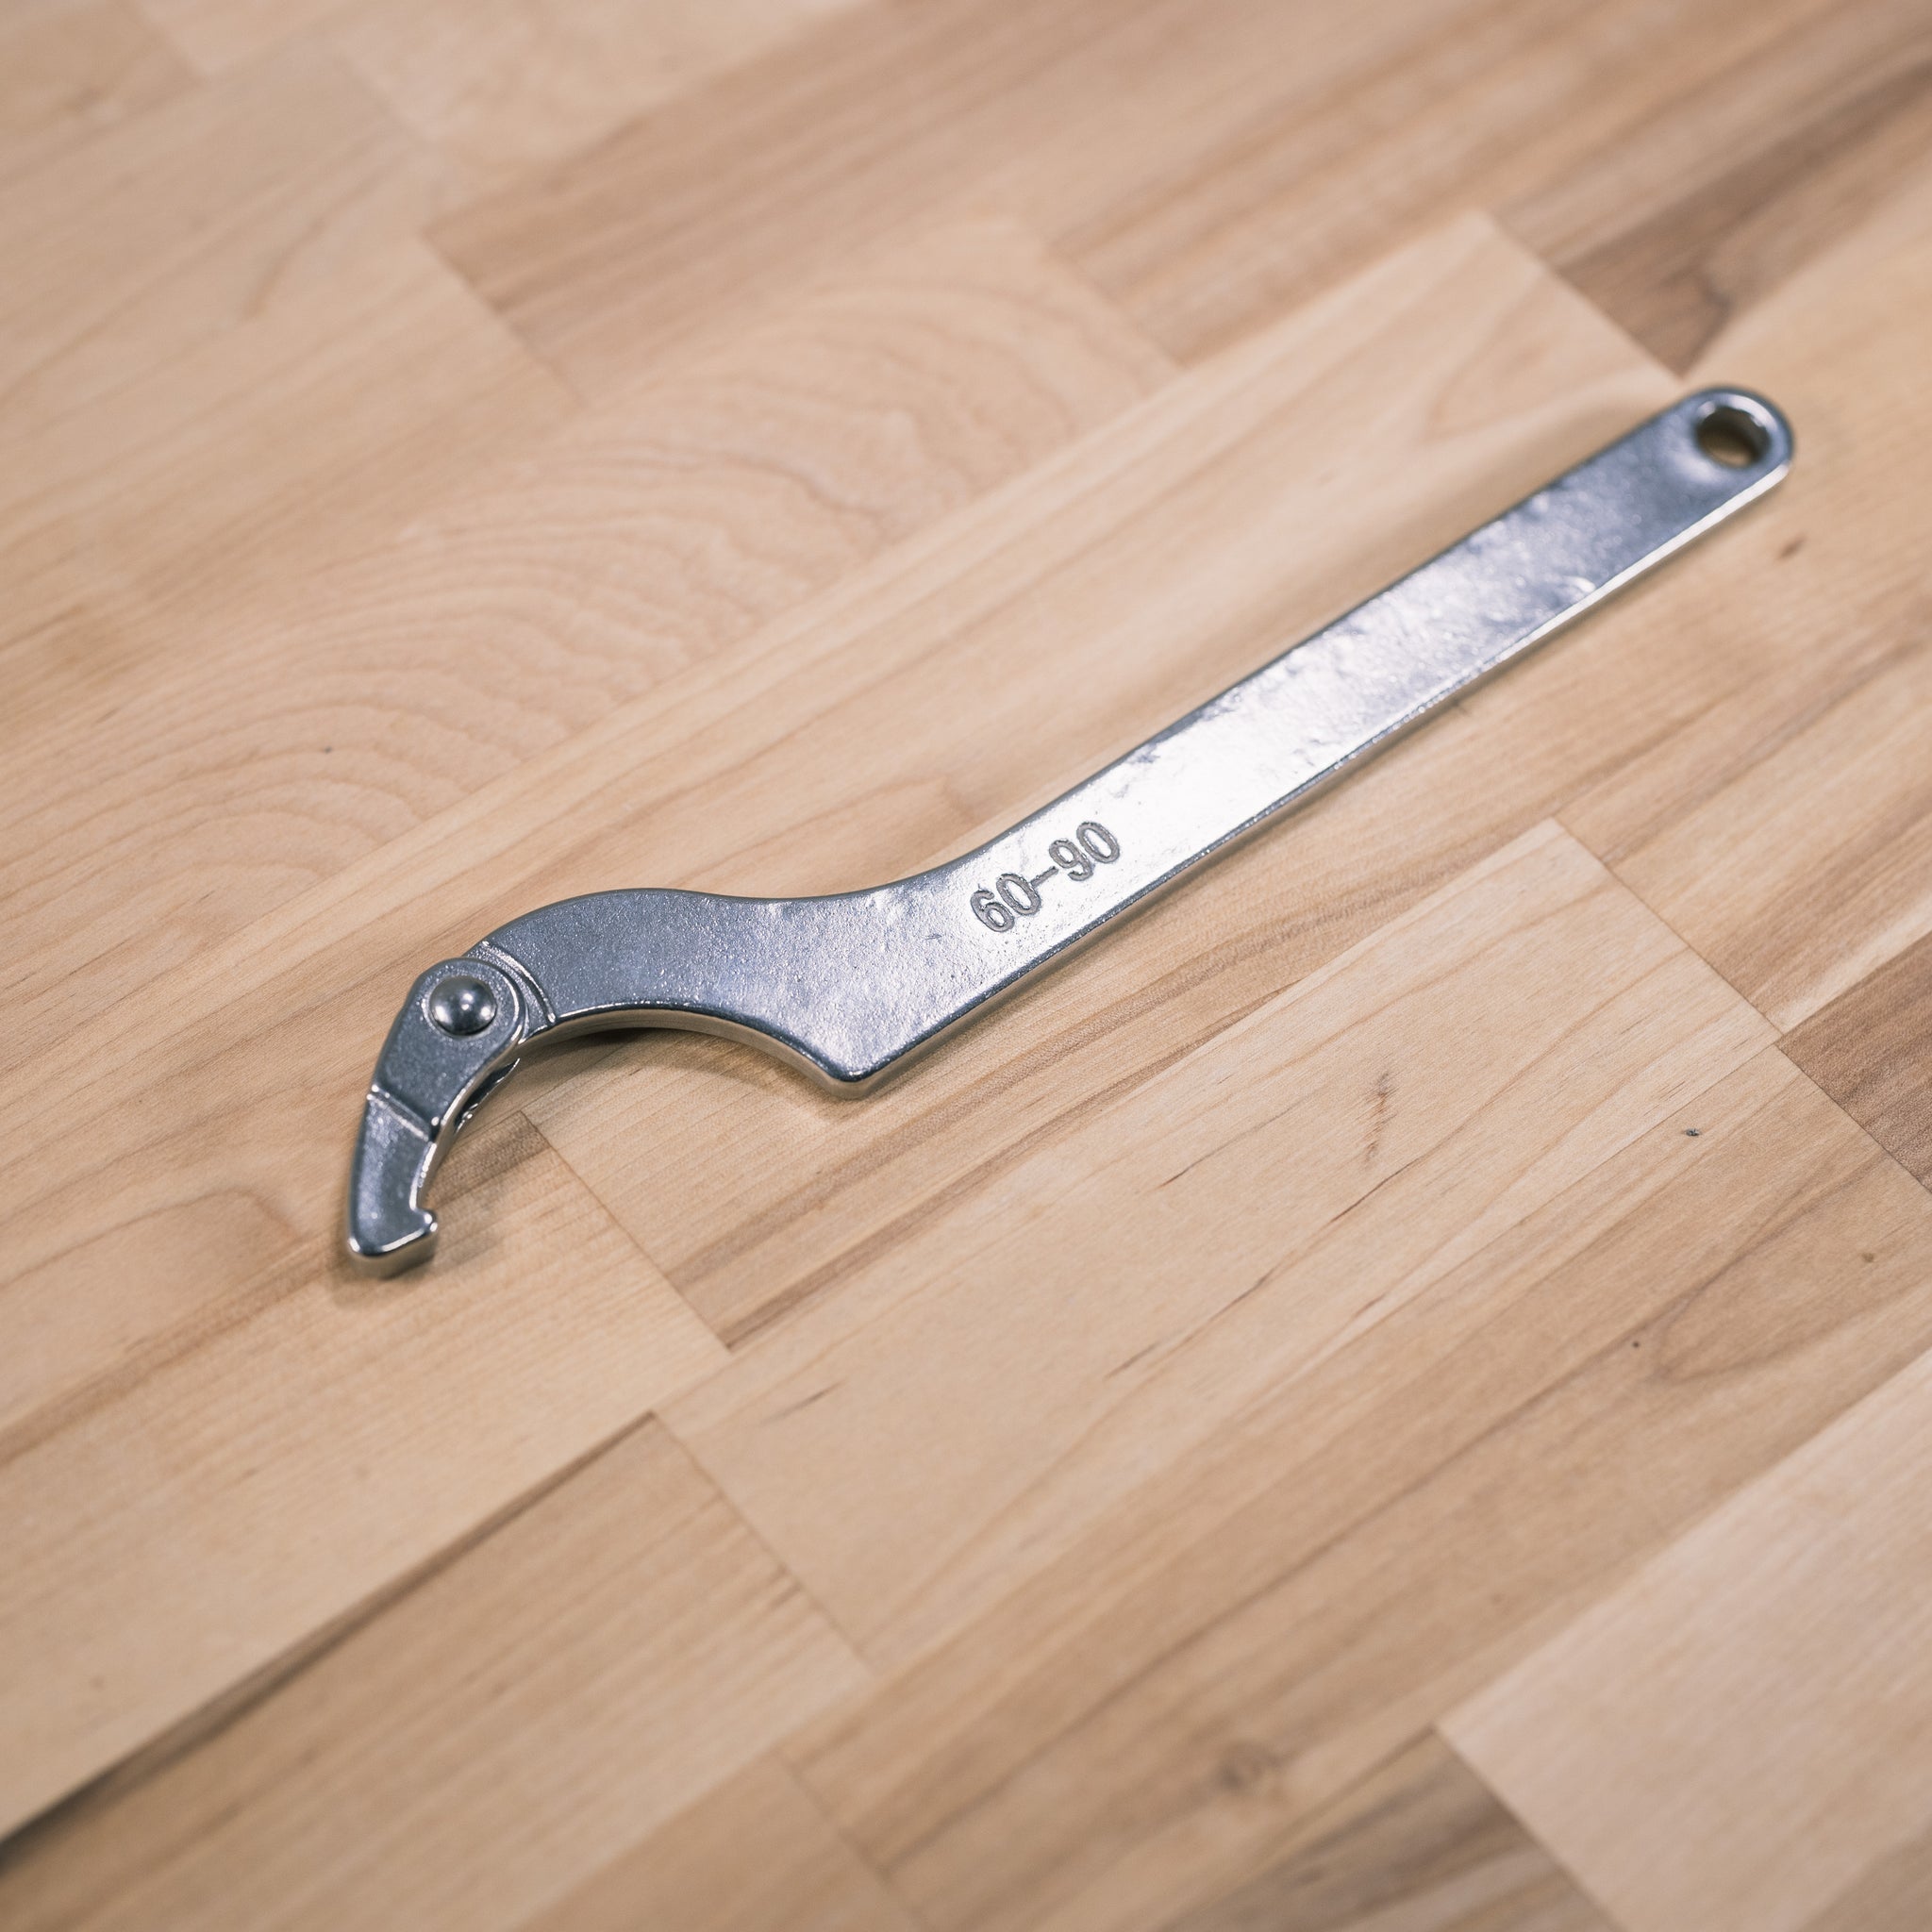 DIN Spanner Wrench - Ss Brewtech